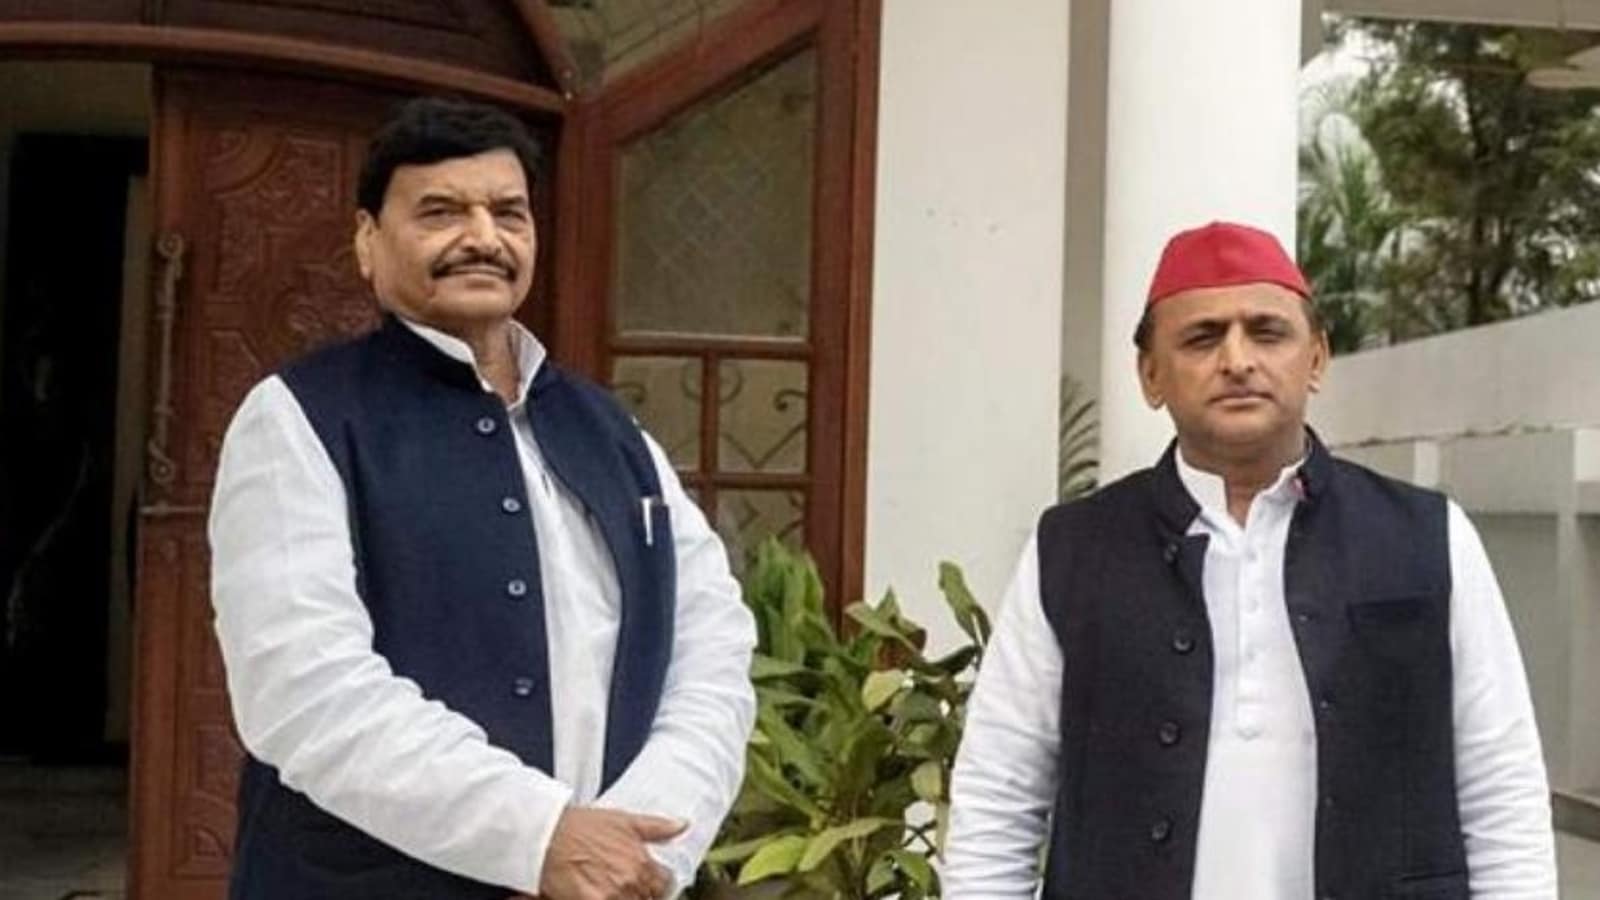 Akhilesh Yadav’s uncle dissolves party units amid speculation over BJP bonhomie